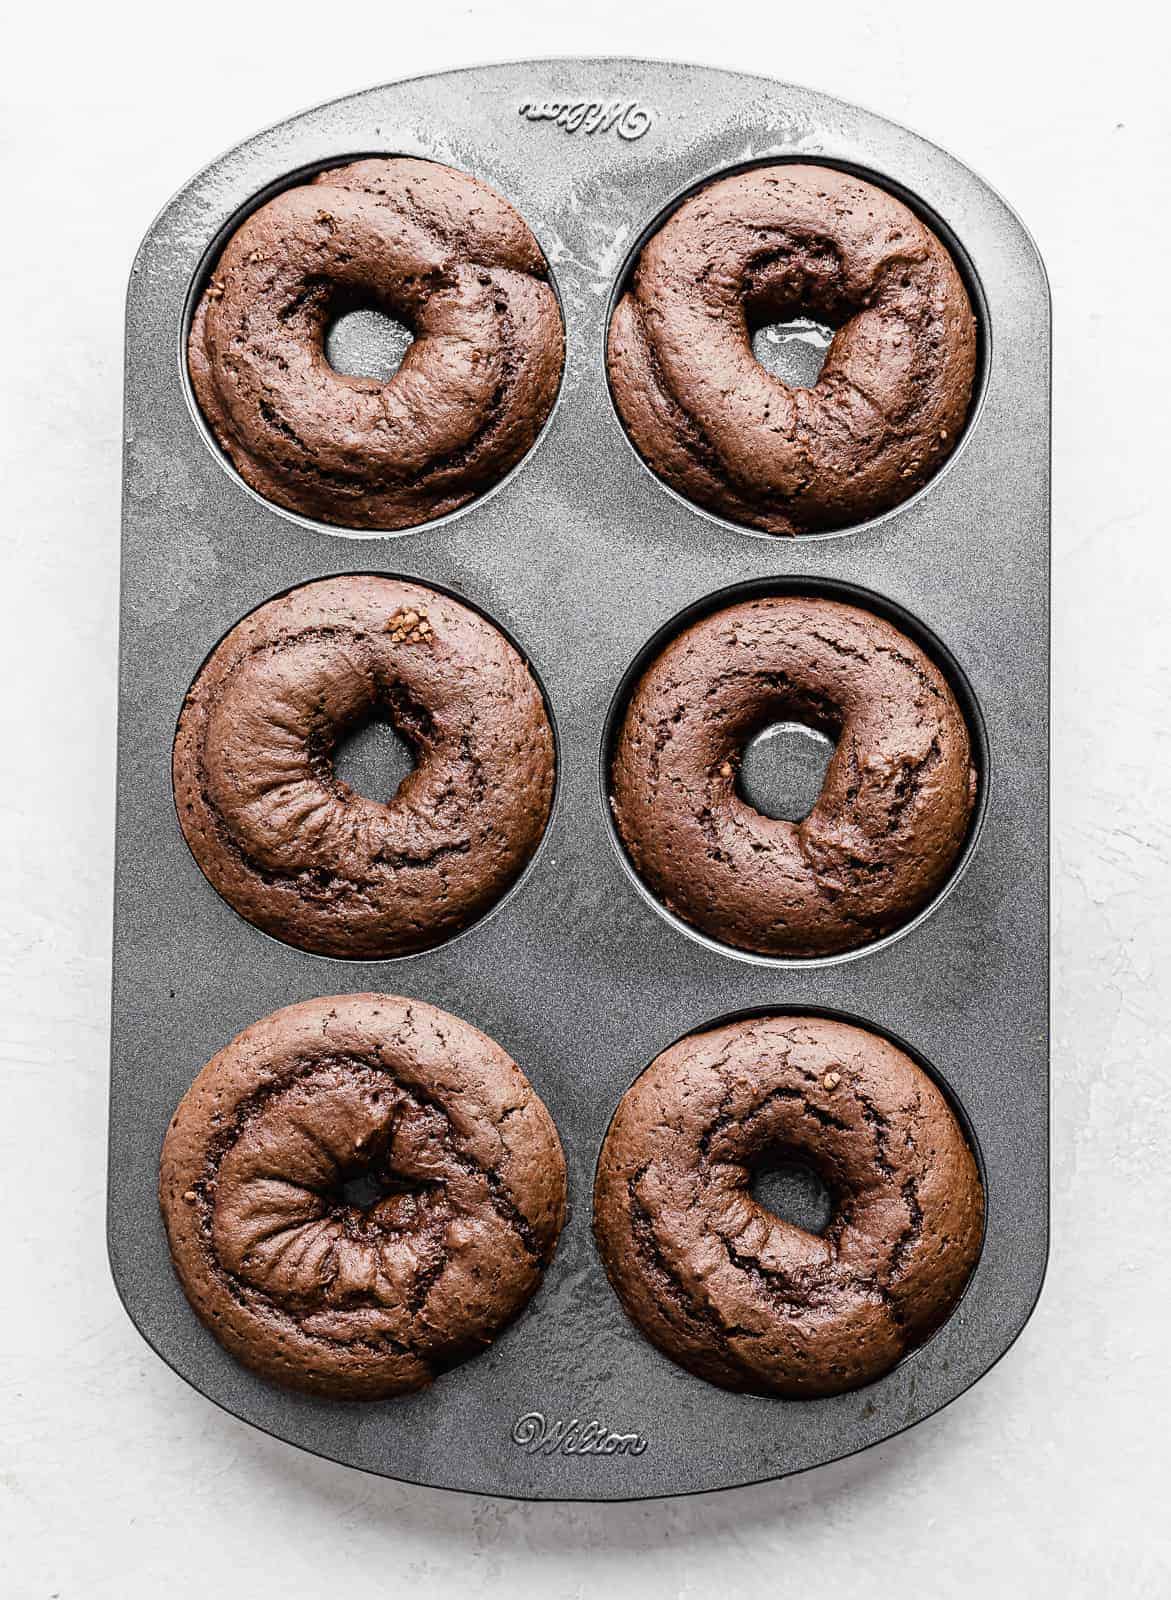 Baked Chocolate Doughnuts in a donut pan.